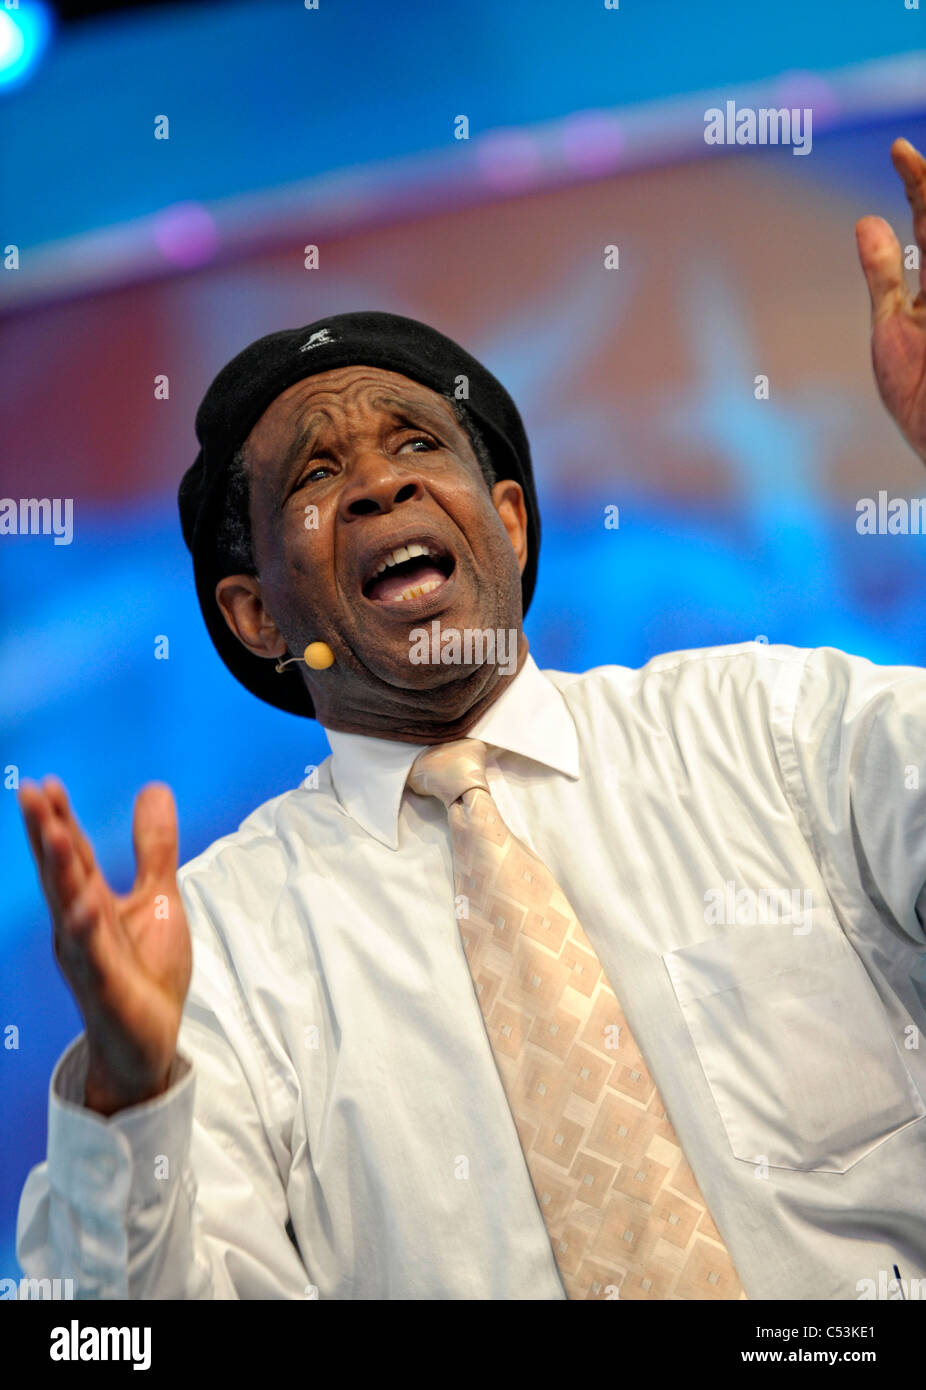 Alex Pascall MBE, founder of the Notting Hill Carnival, performs at the 2011 Llangollen International Musical Eisteddfod Stock Photo